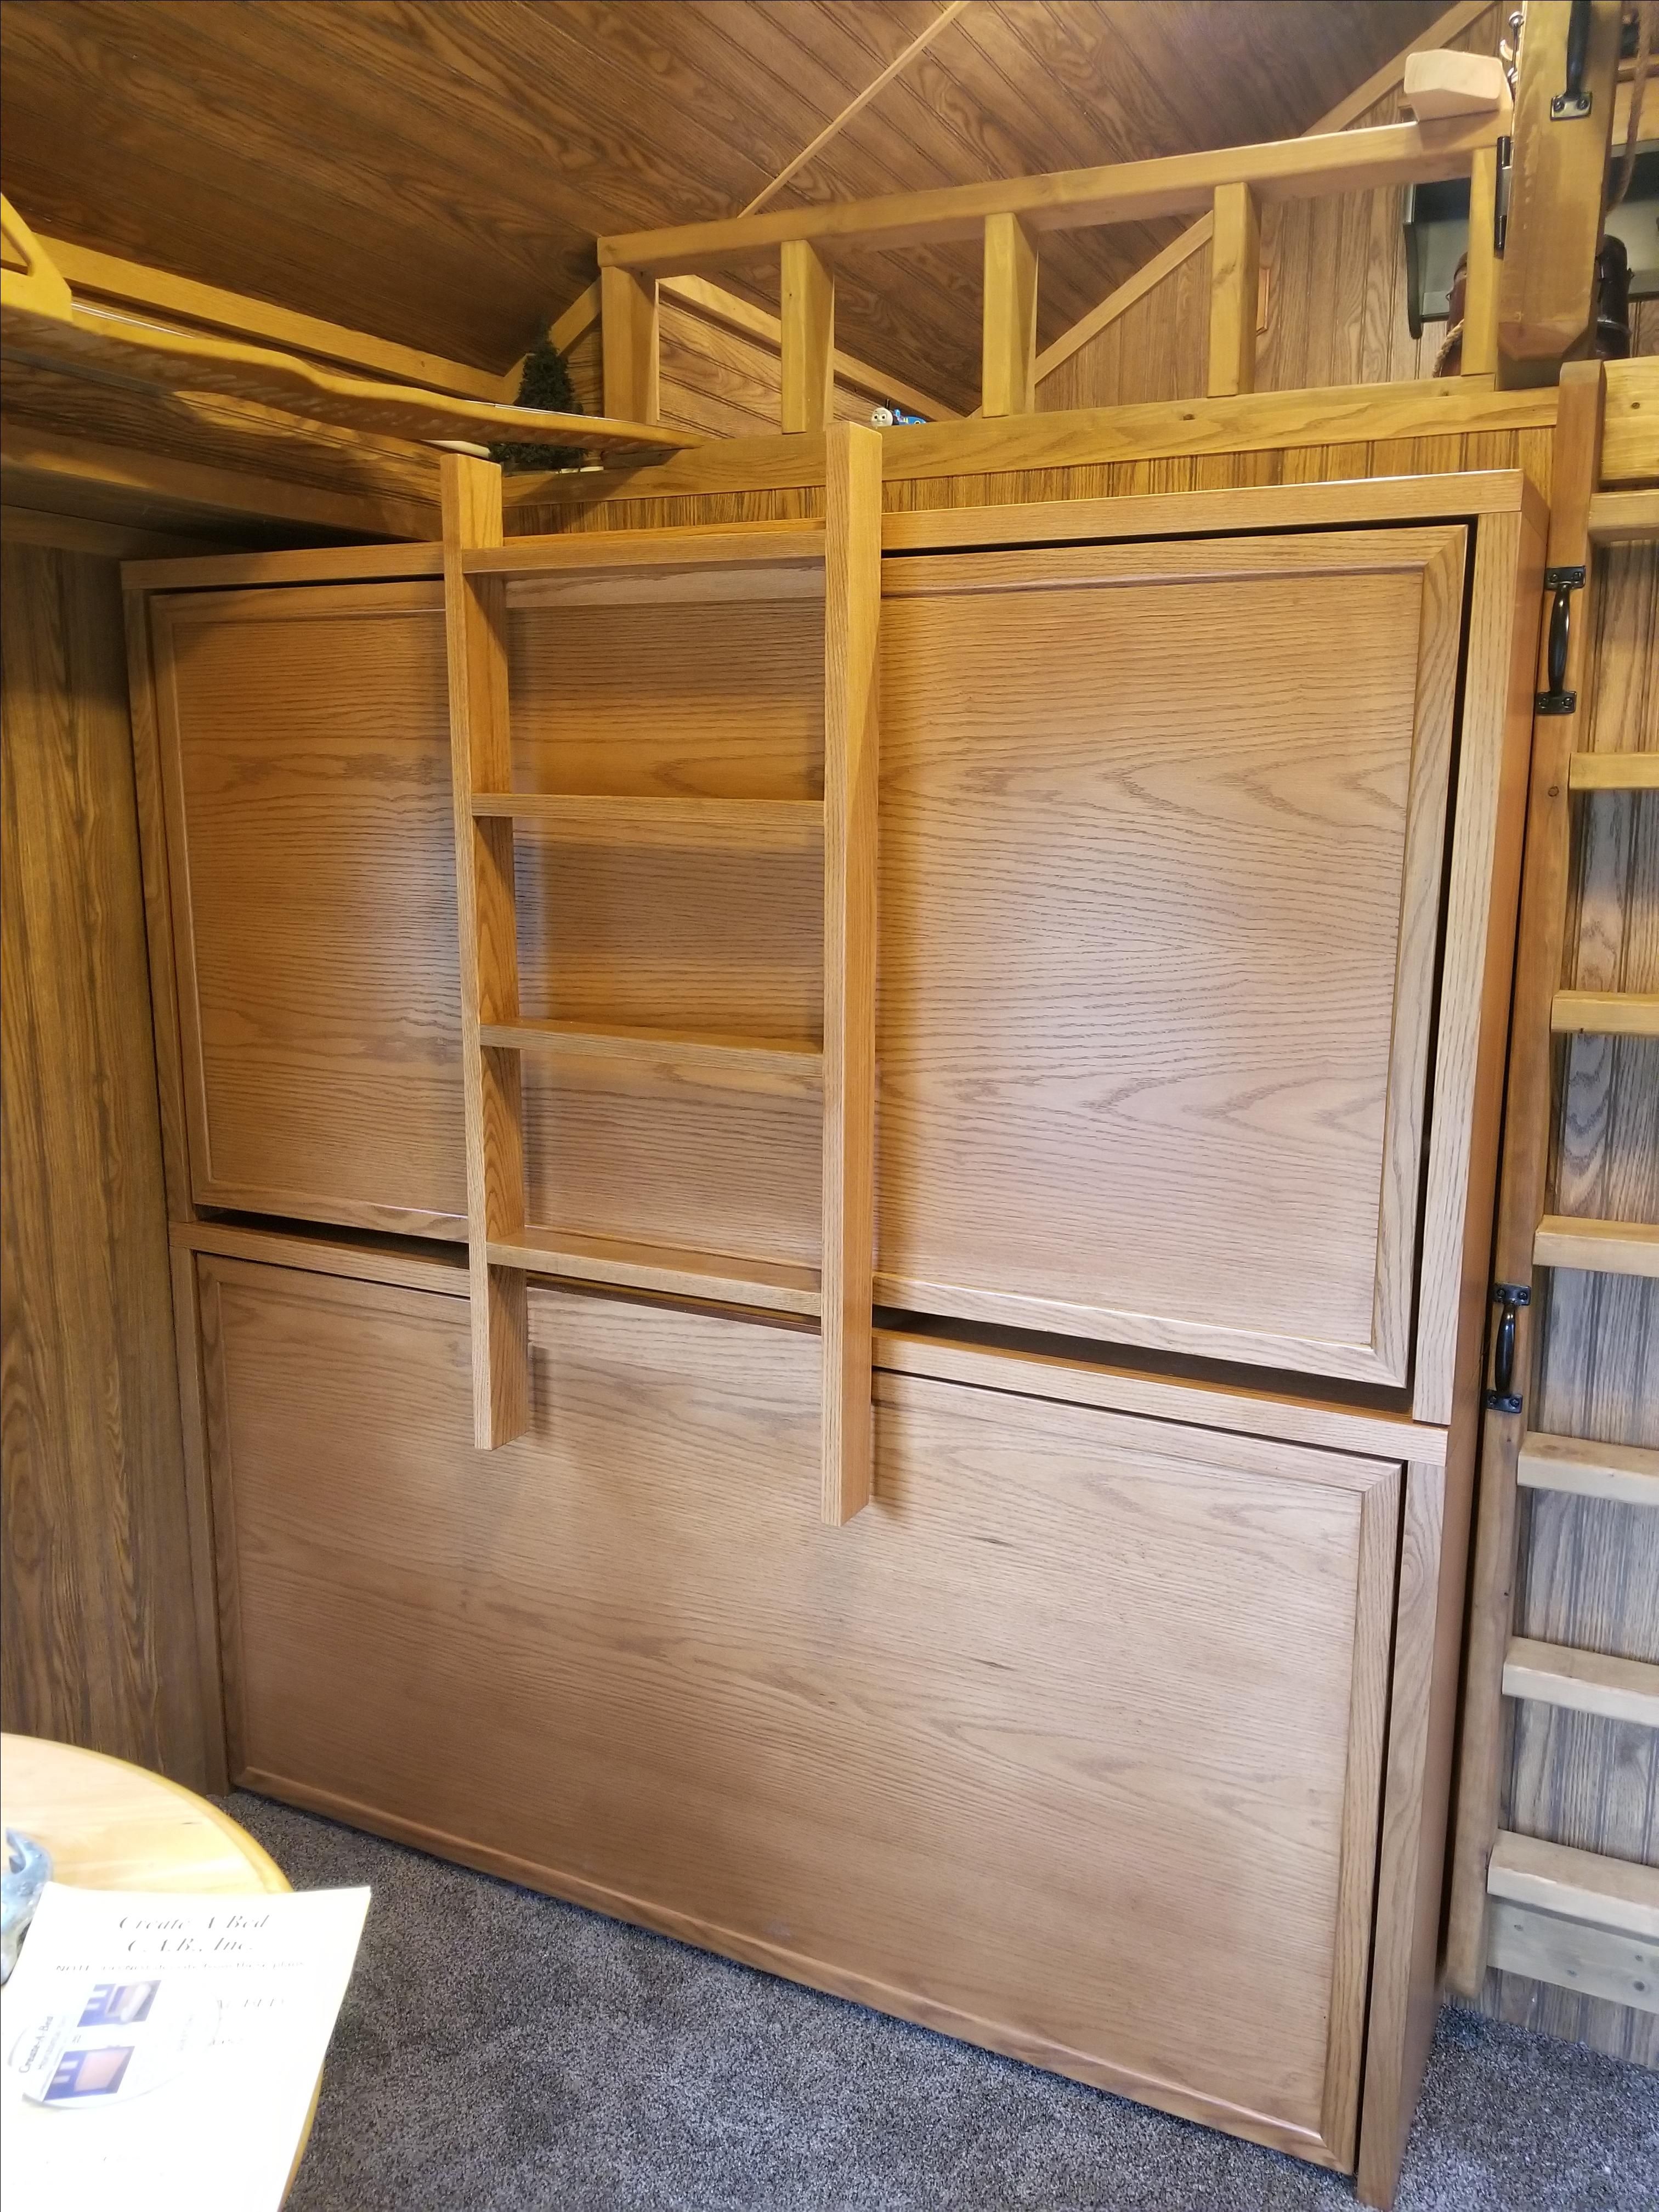 Murphy Bunk Beds By Kirk Kreations, How To Make A Murphy Bunk Bed